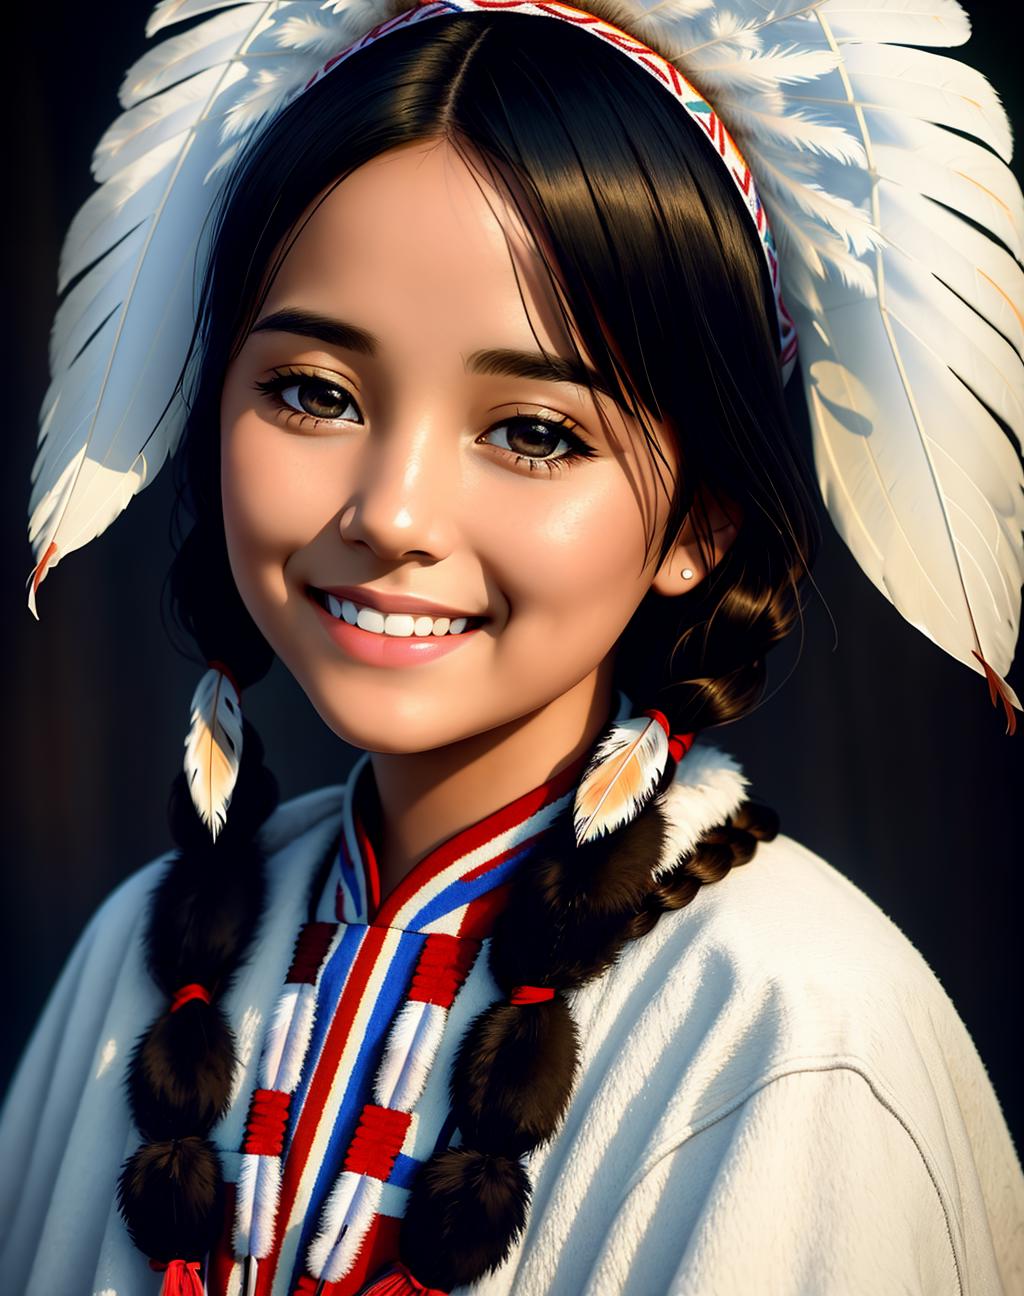 Native American image by EDG